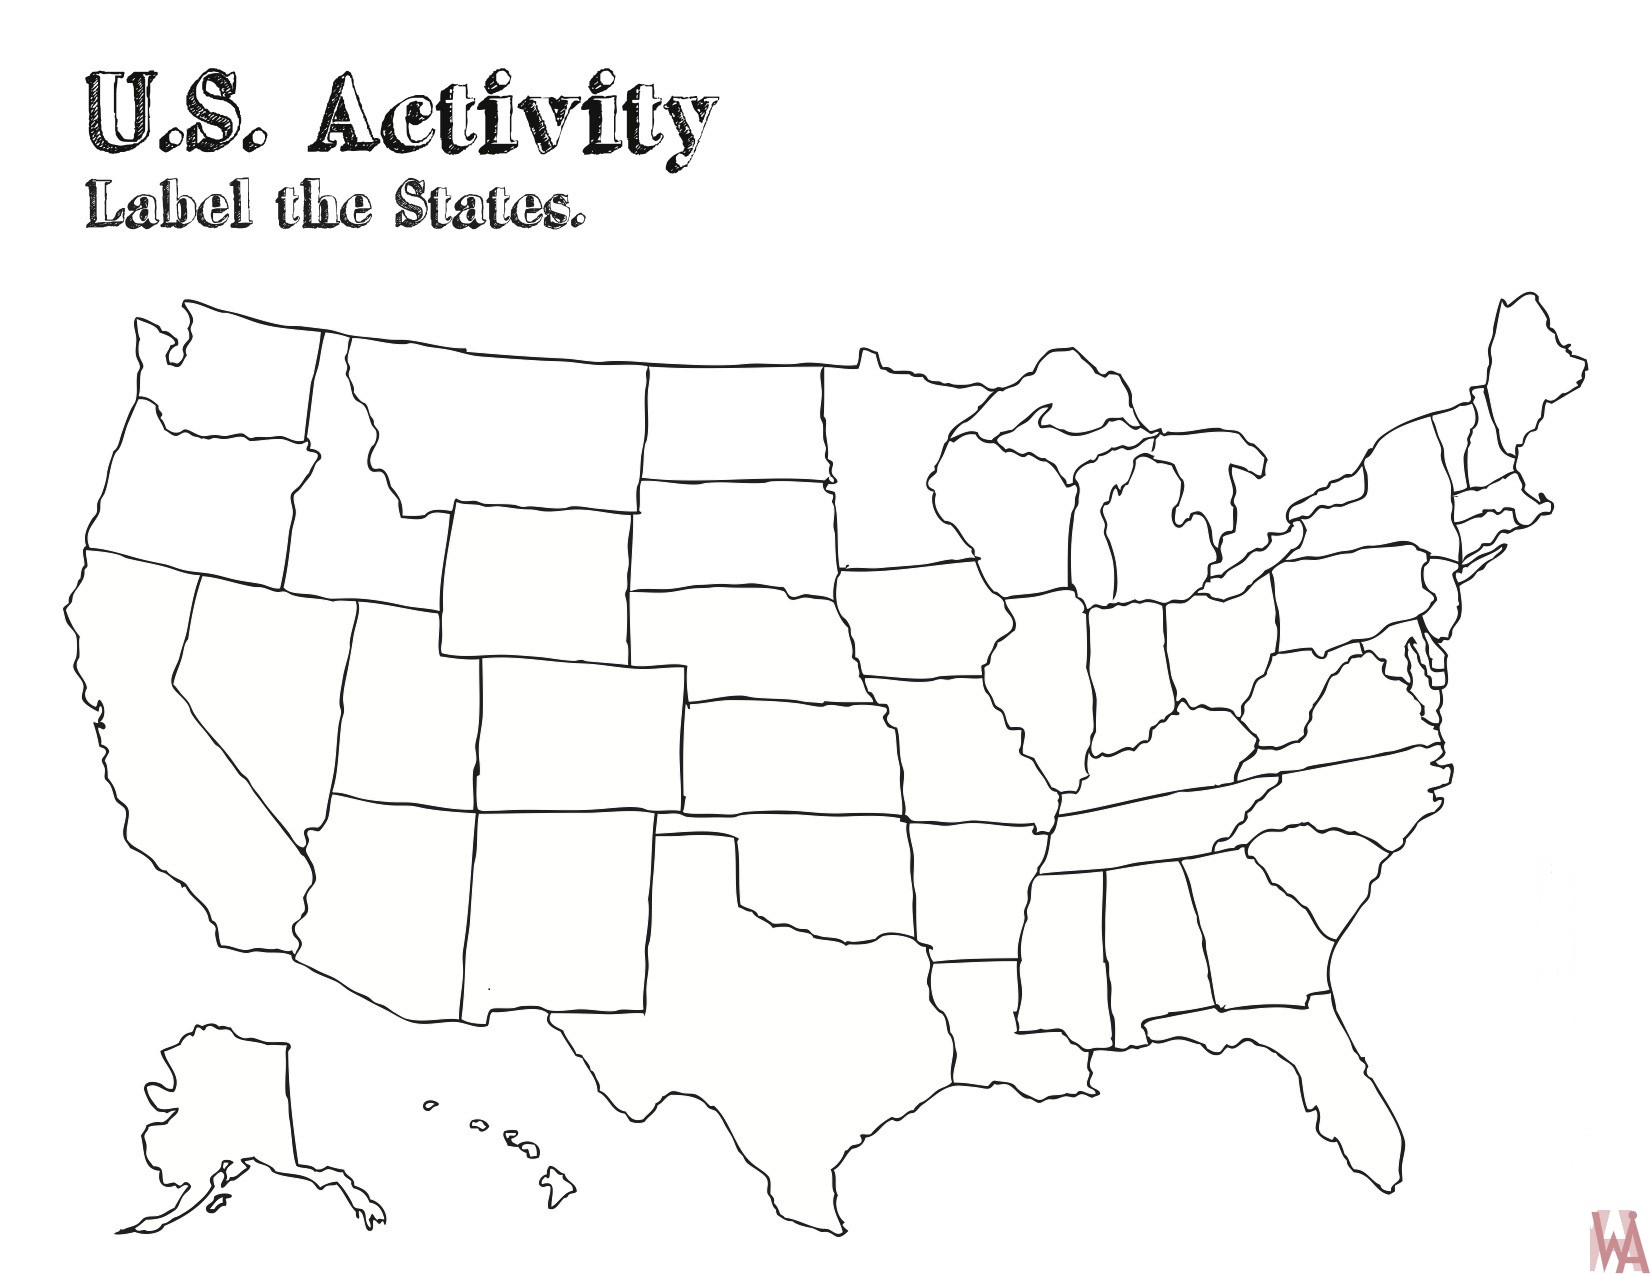 Blank Map Of The United States To Label - QUIZ QUESTIONS AND ANSWERS Throughout Blank Template Of The United States